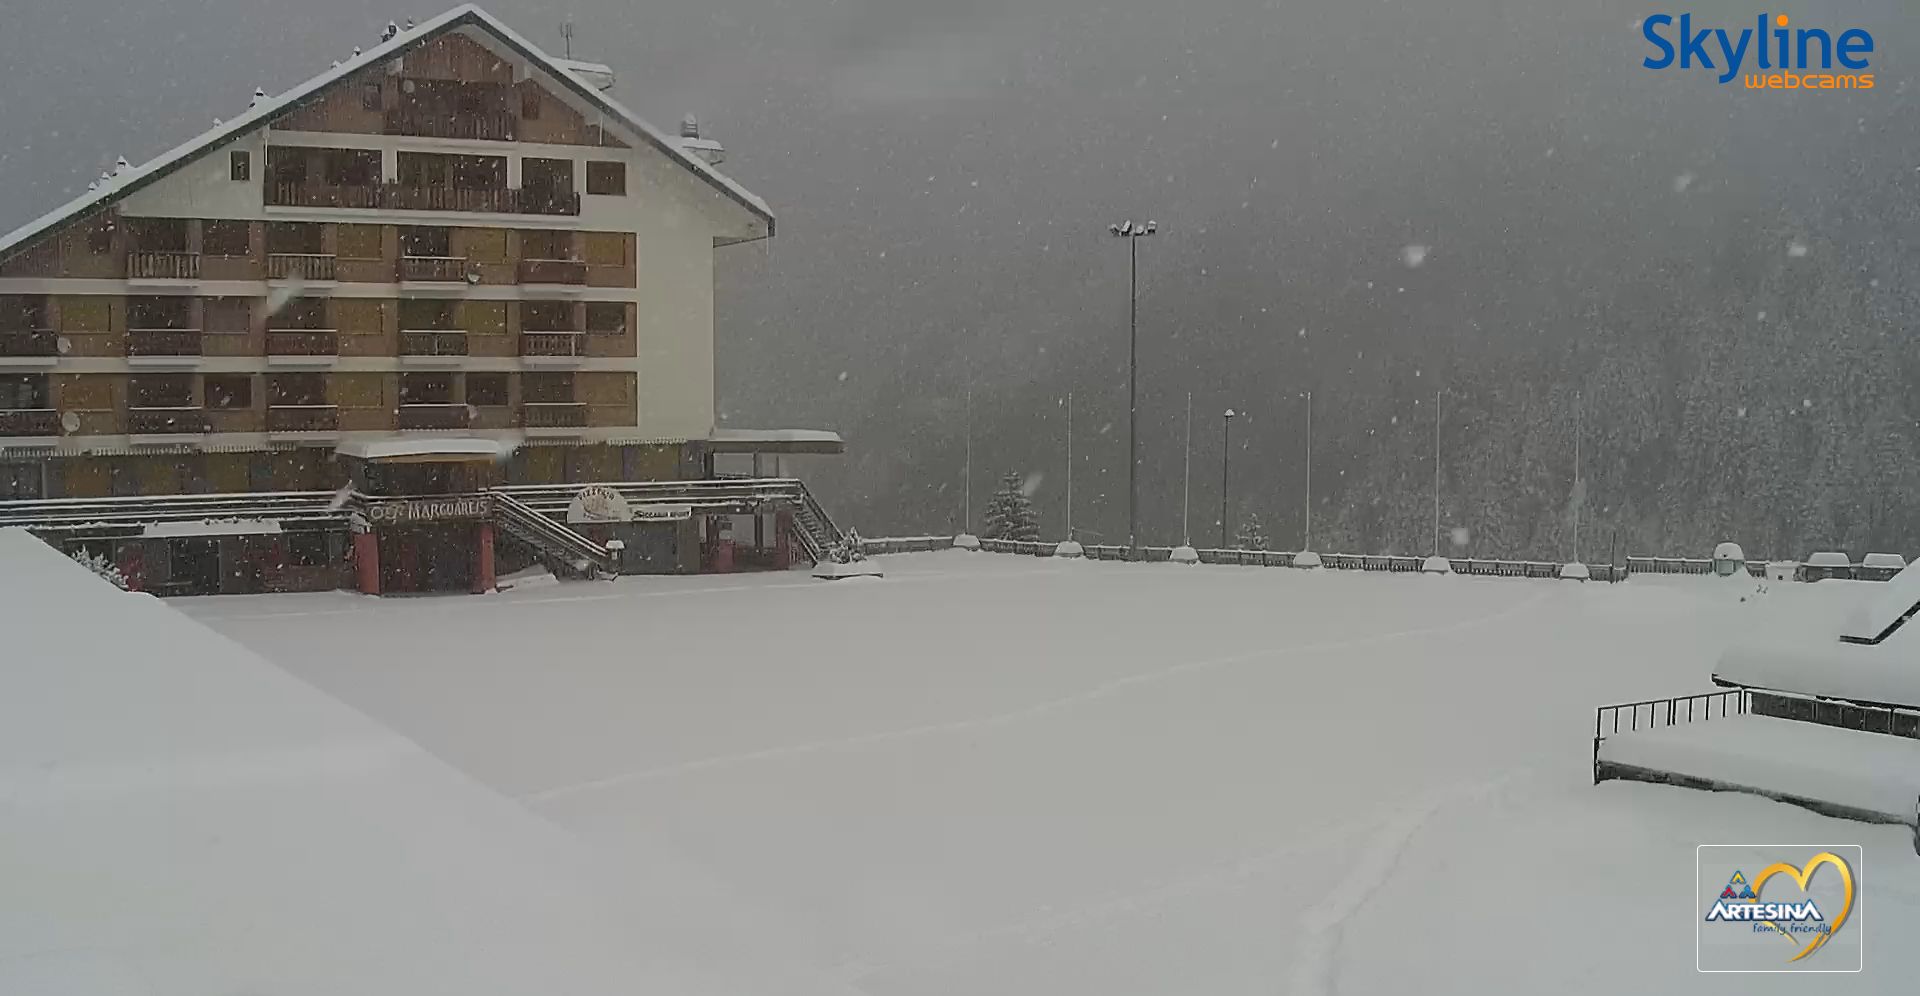 At the moment it is snowing heavily in the south of the Piedmont, like here in Artesina (Mondolé Ski)